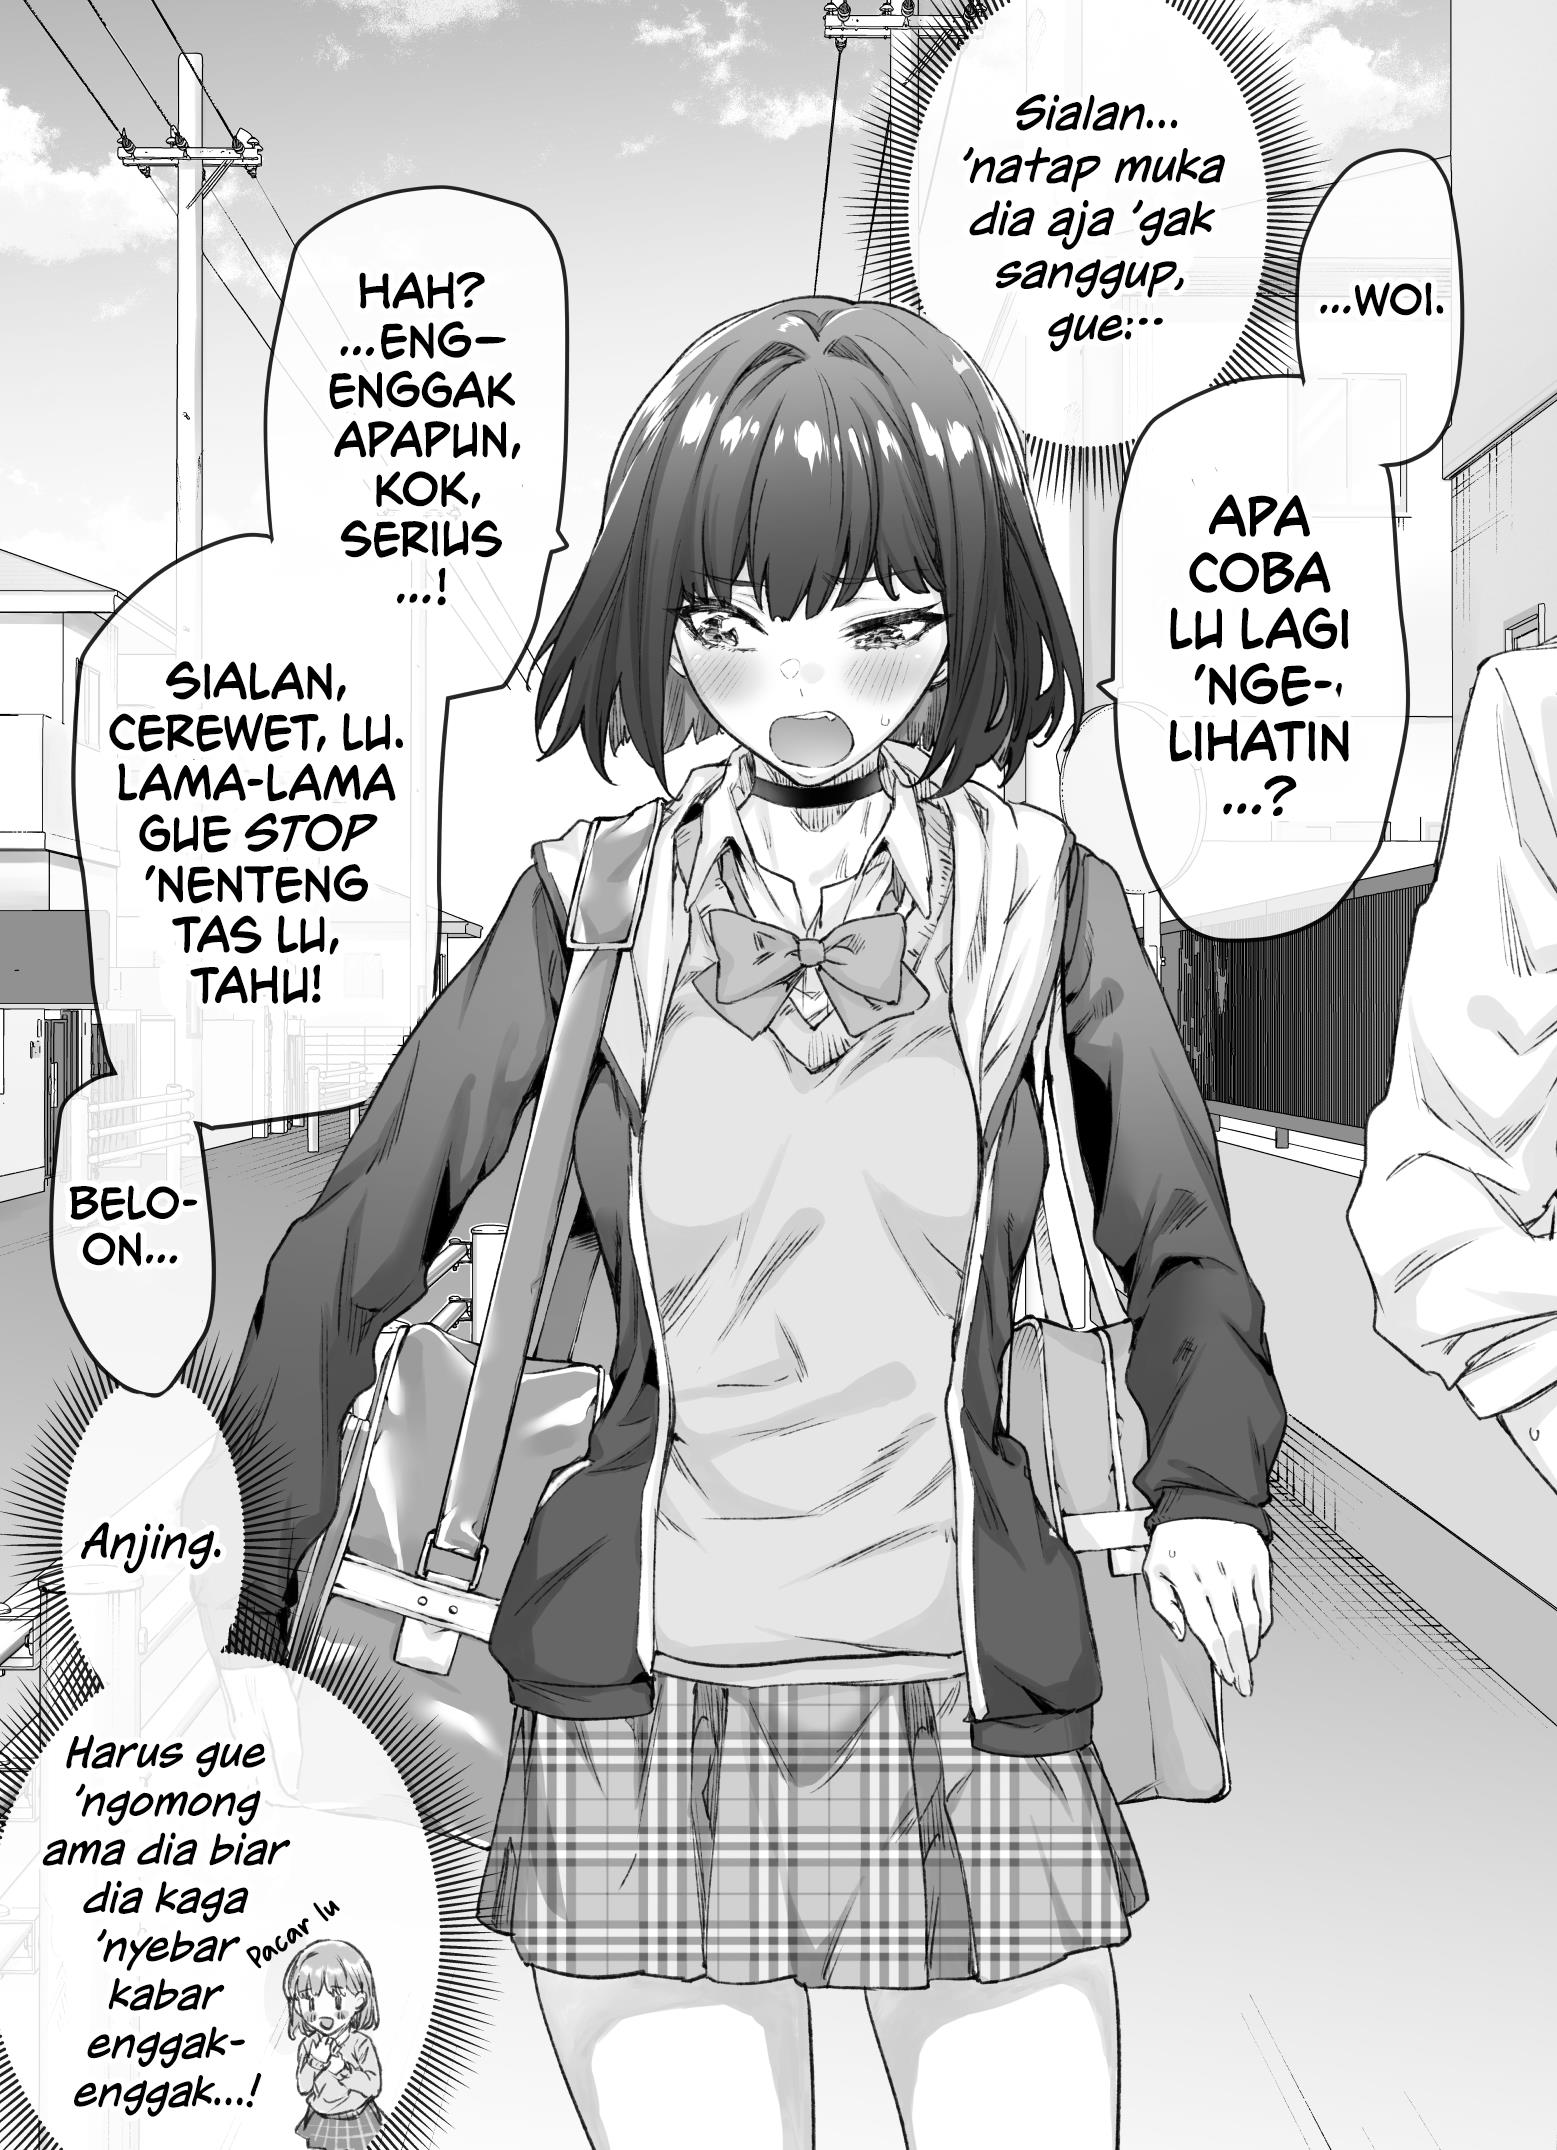 The Tsuntsuntsuntsuntsuntsun tsuntsuntsuntsuntsundere Girl Getting Less and Less Tsun Day by Day Chapter 15.2